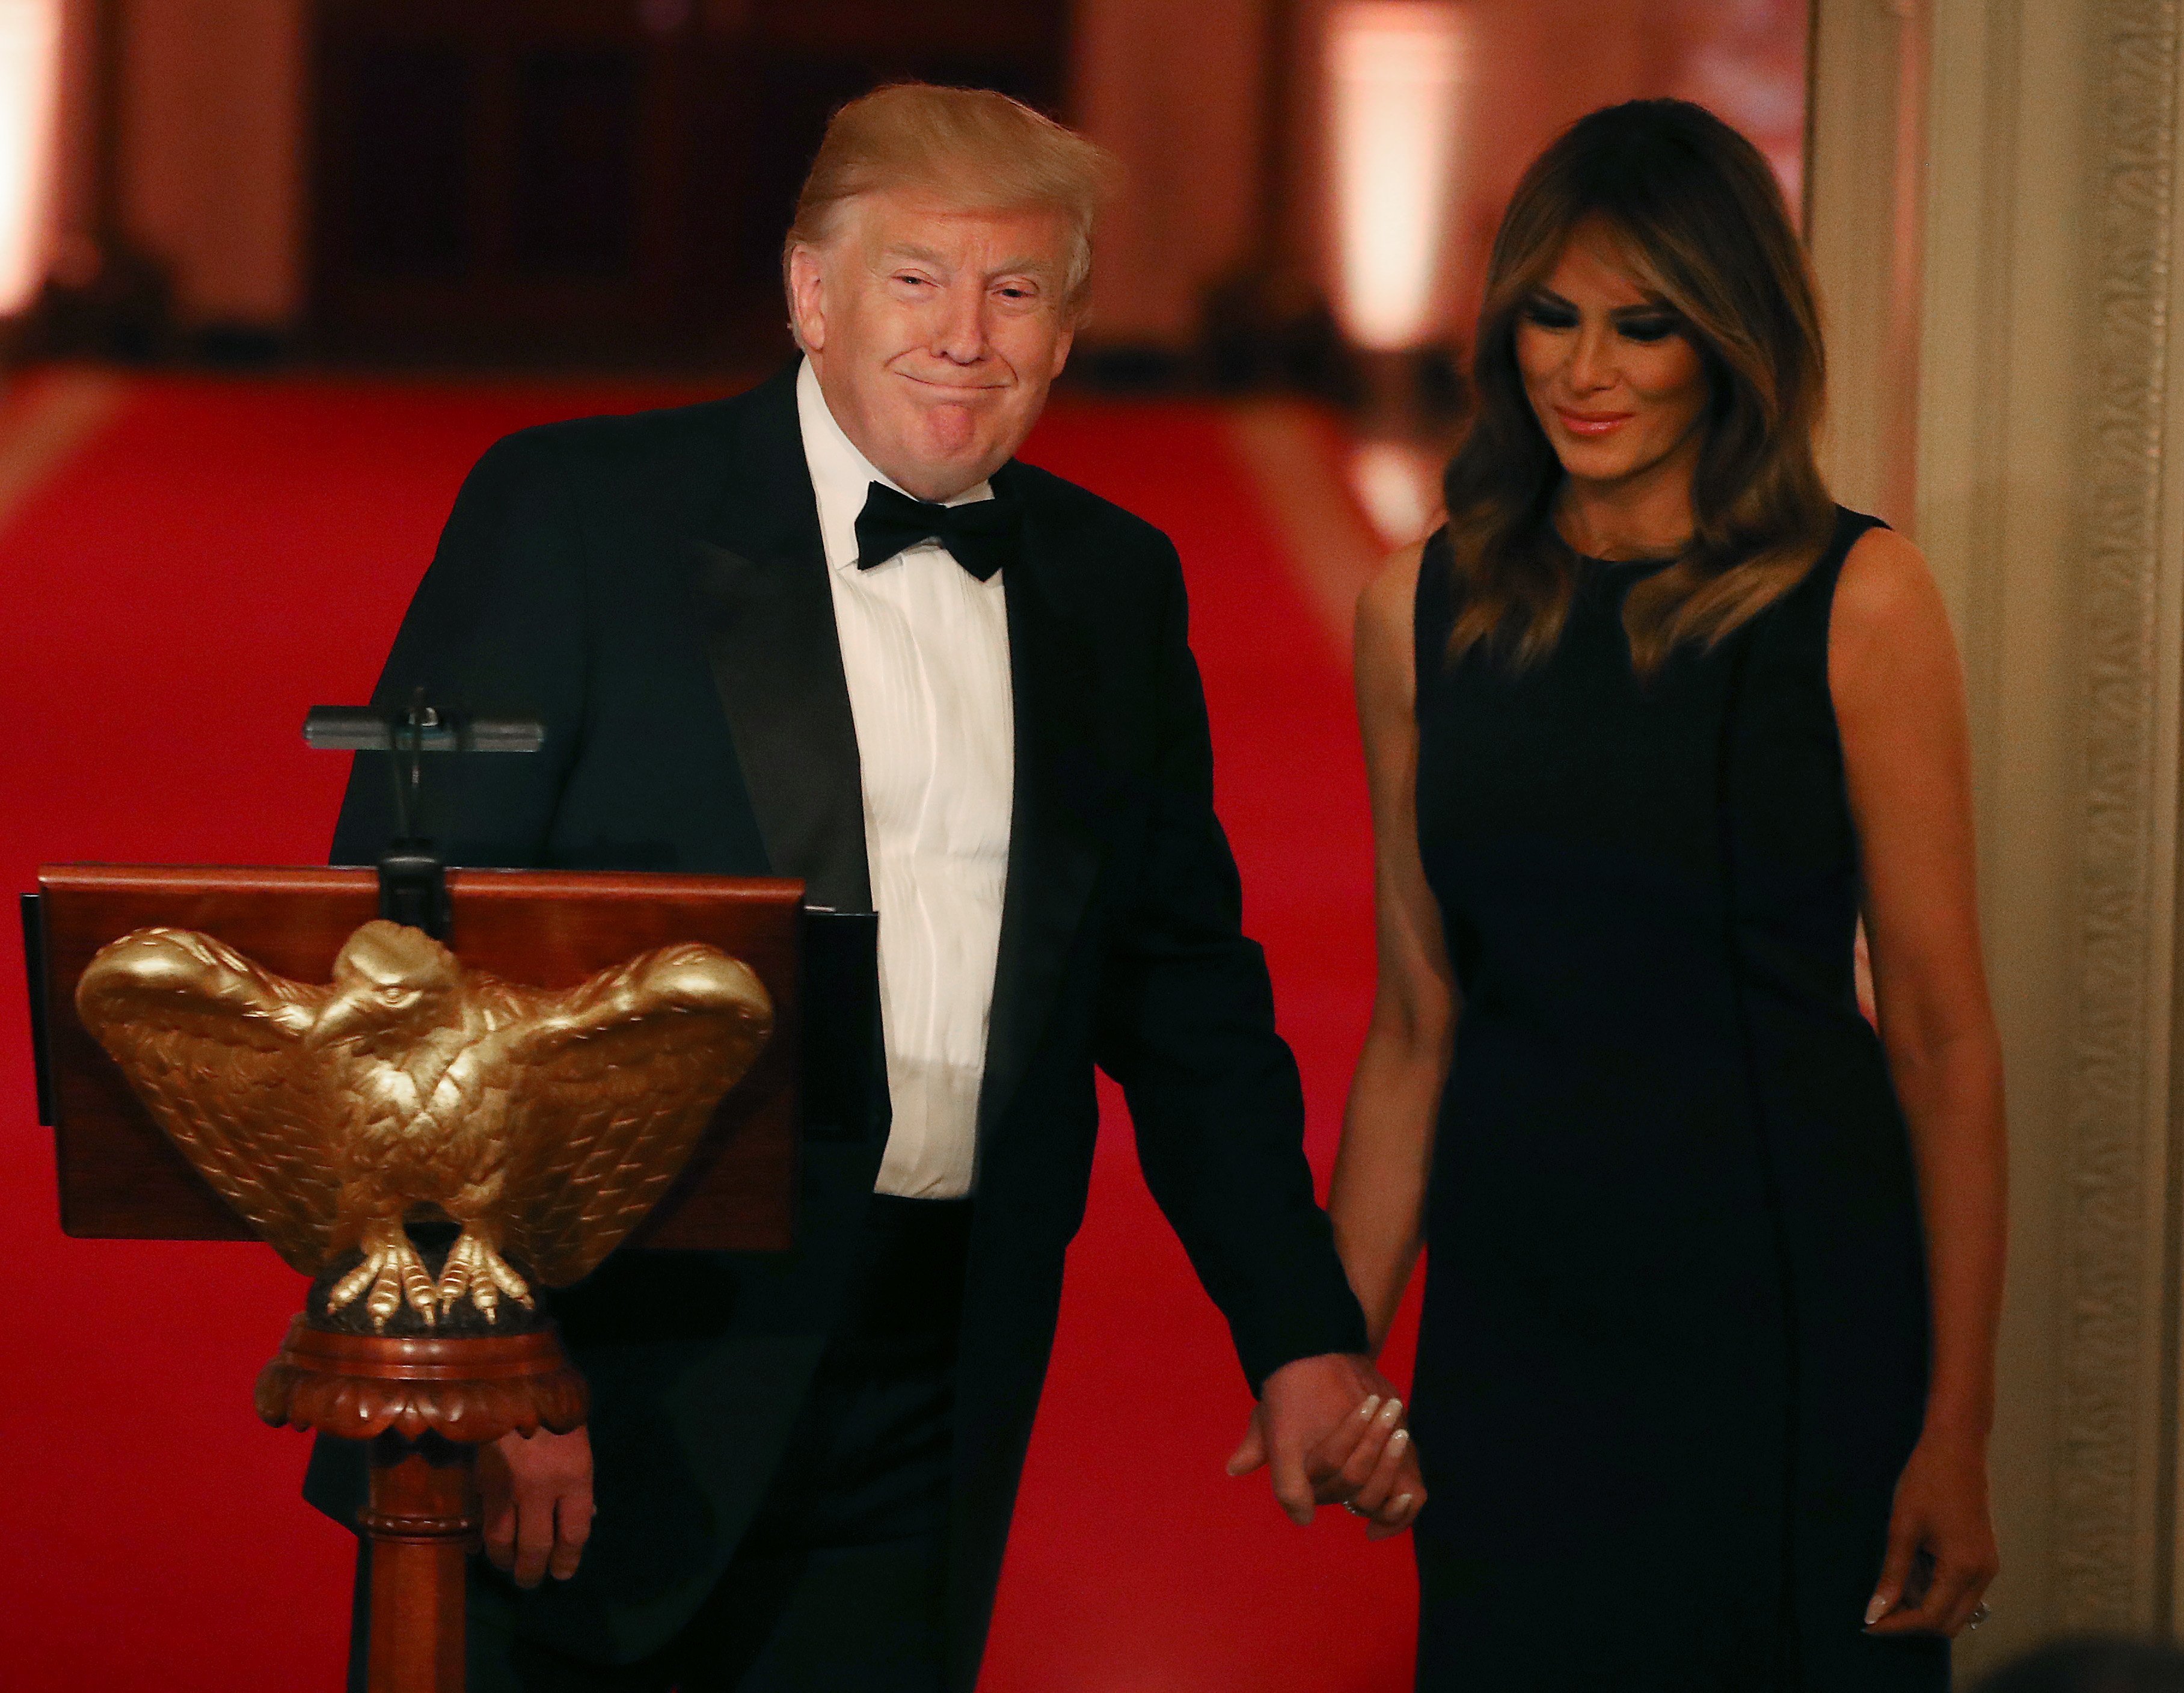 Donald Trump and Melania Trump at the White House Historical Association Dinner in the East Room of the White House | Photo: Getty Images